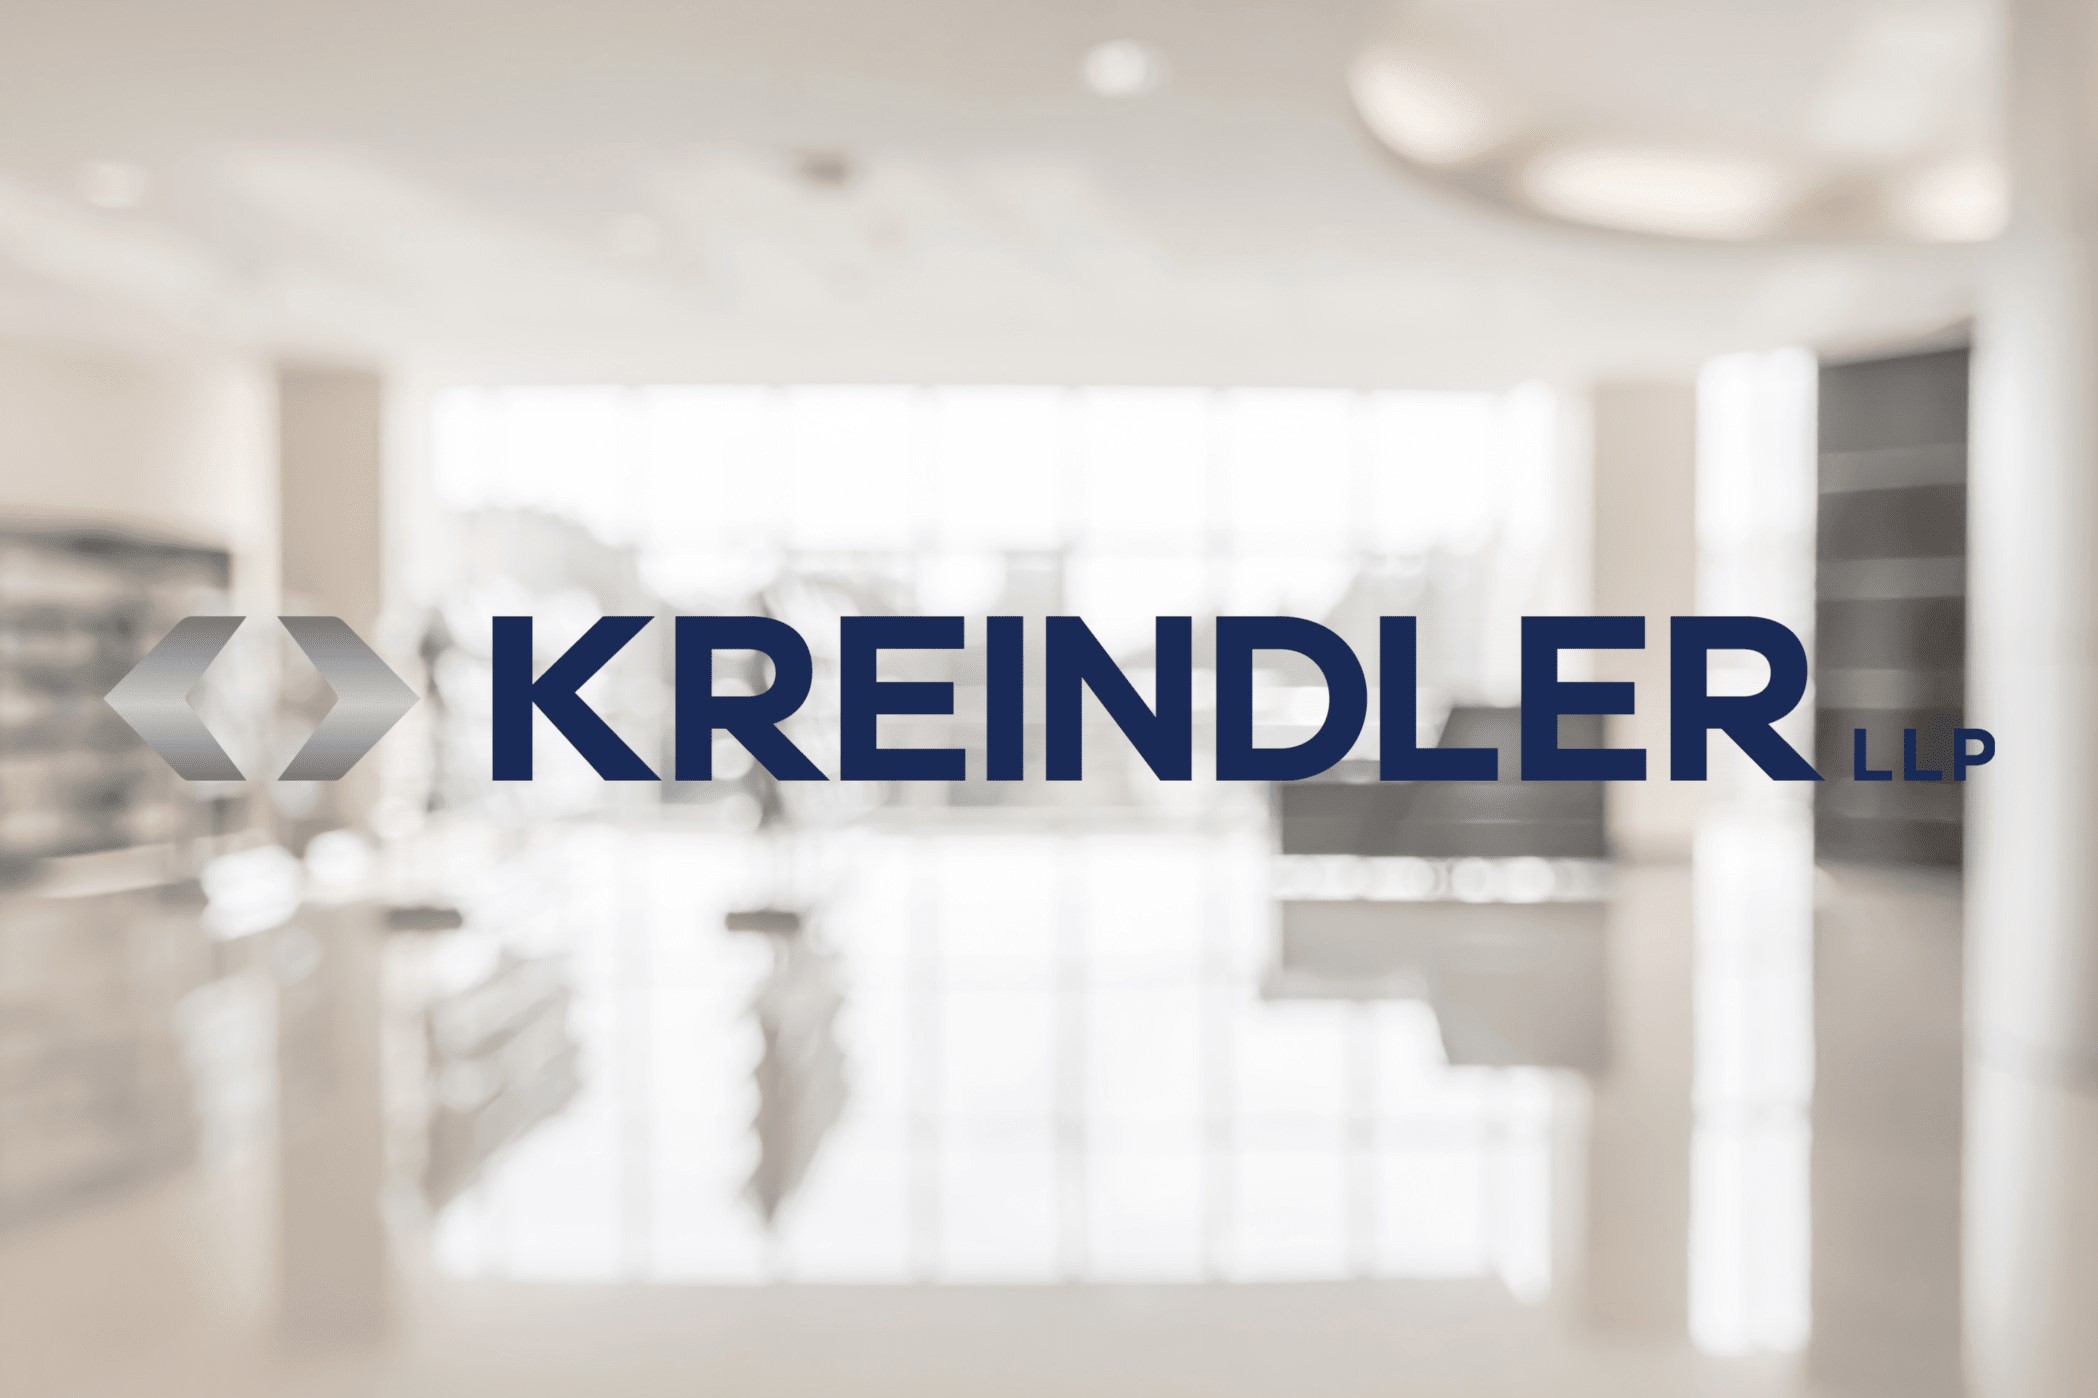 Kreindler & Kreindler: Leveraging Your Bank to Grow Into a $20 Billion Law Firm